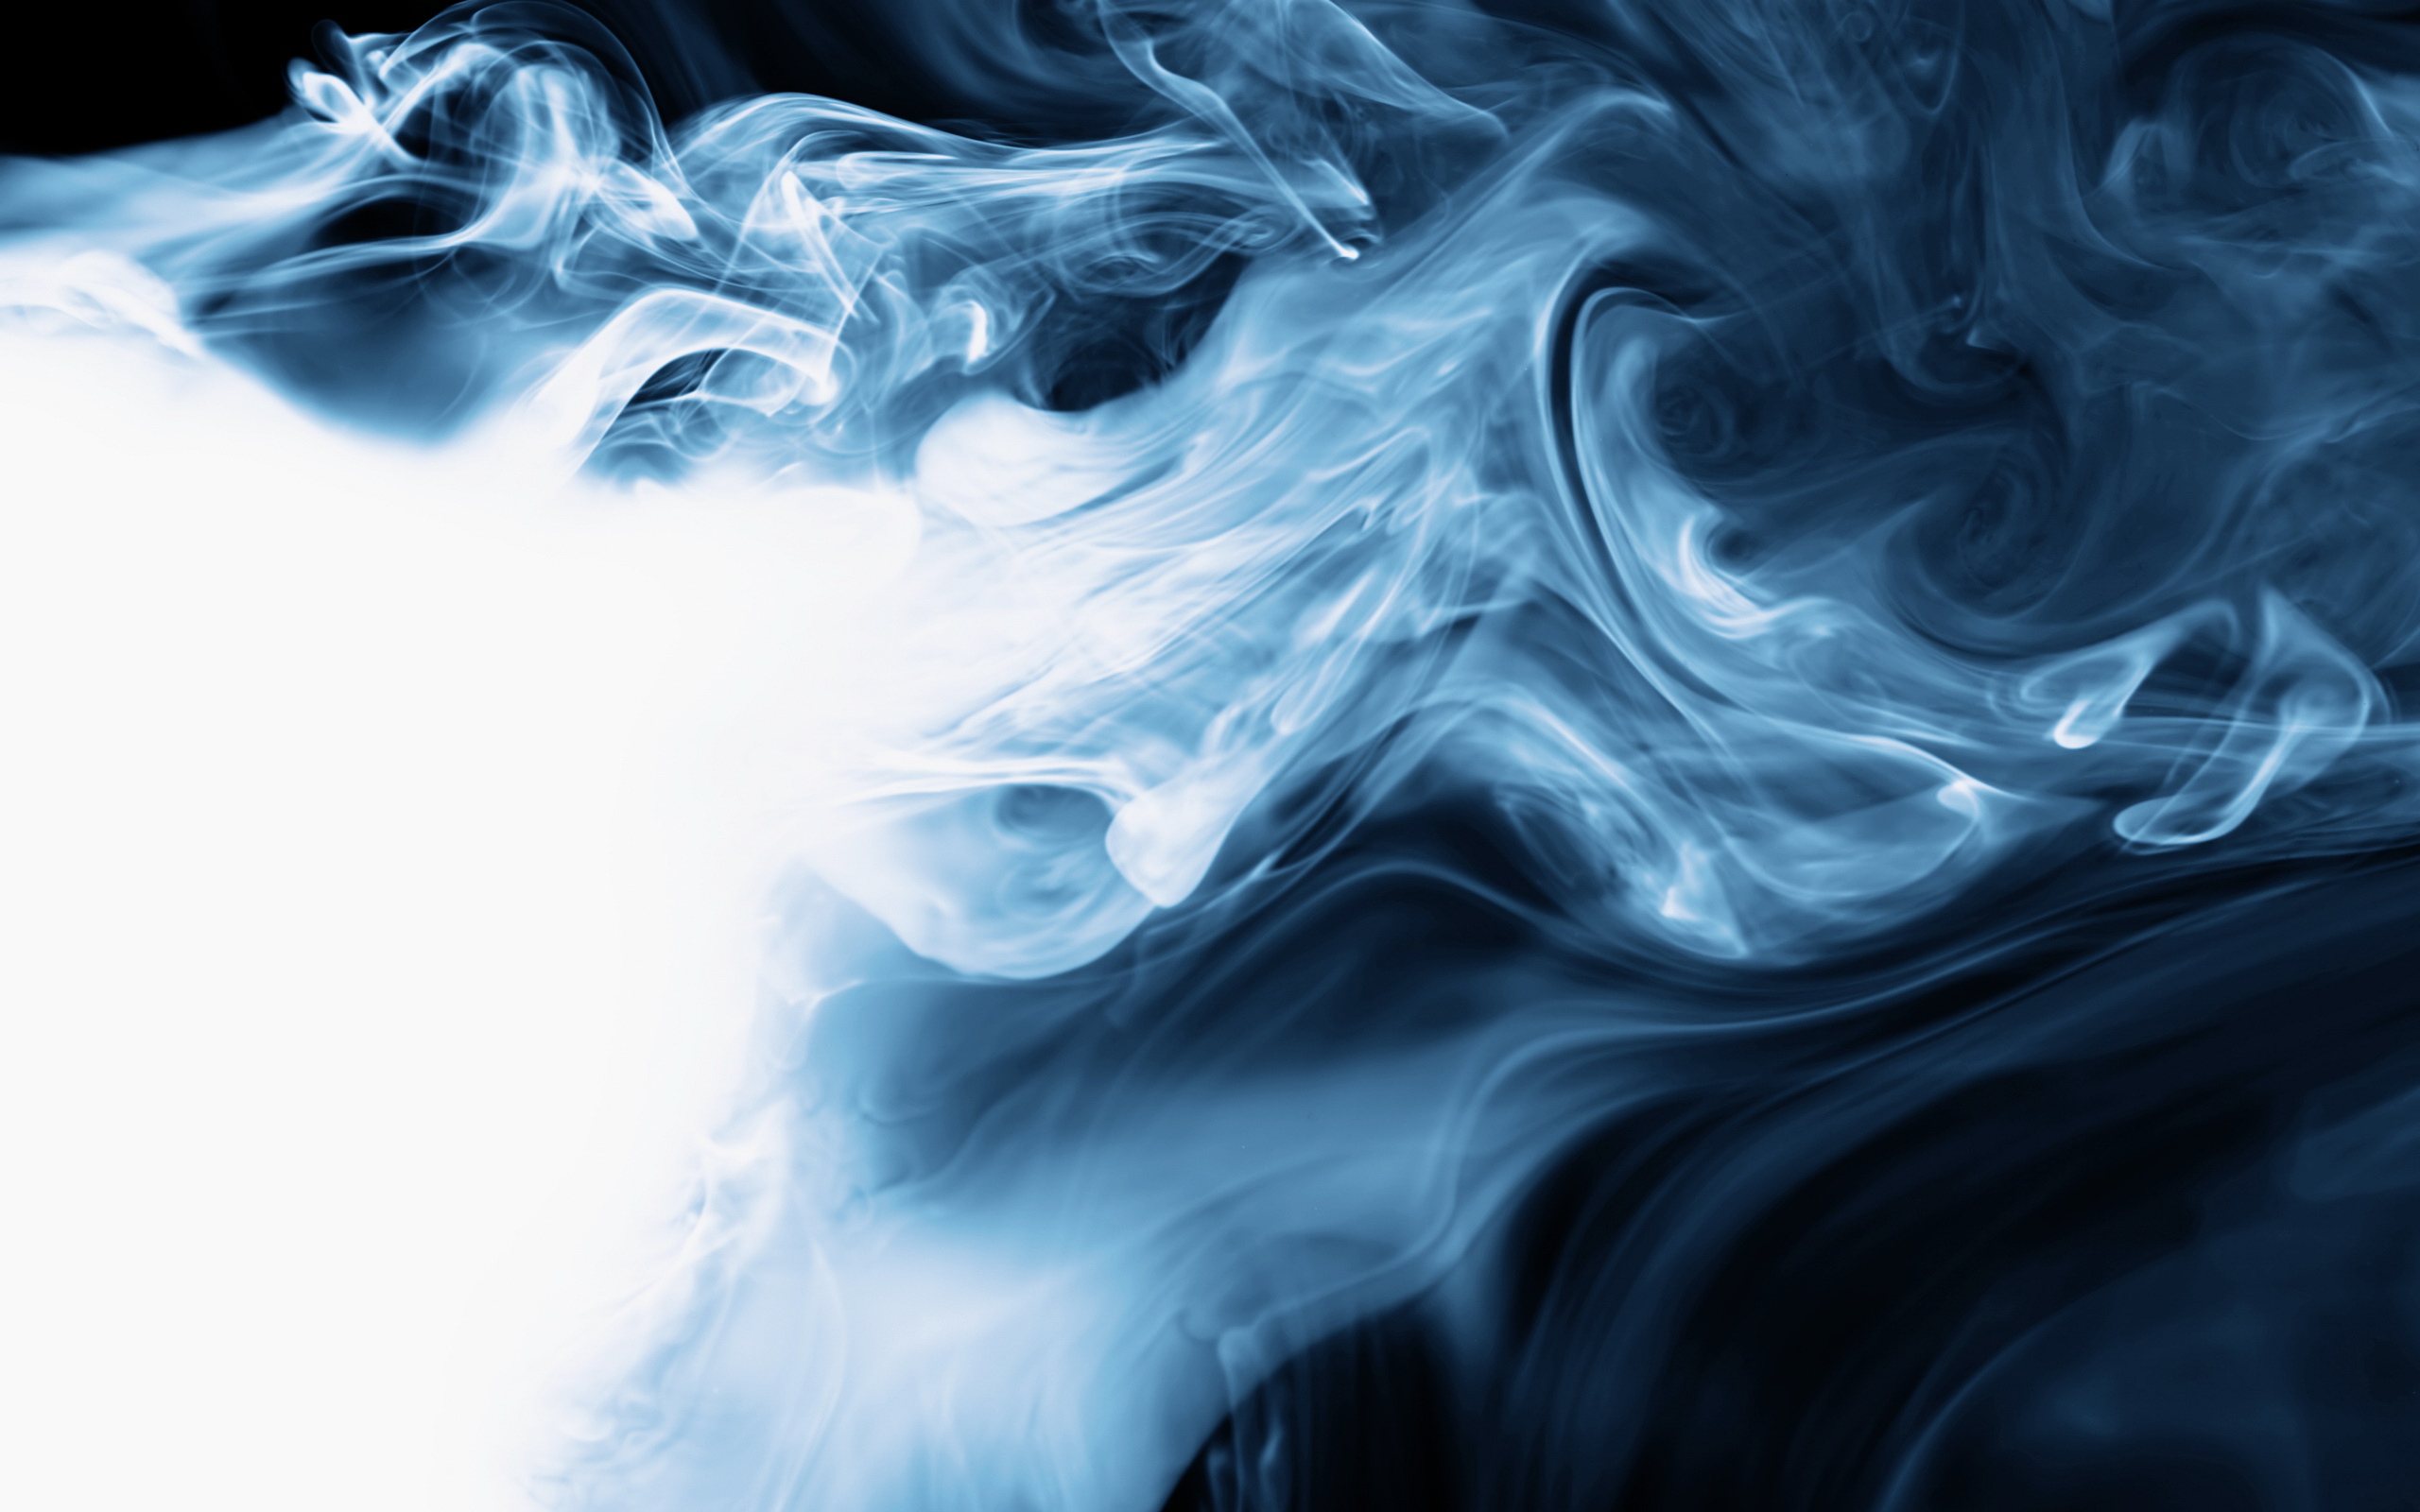 Smoke Wallpapers and Background Images - stmed.net